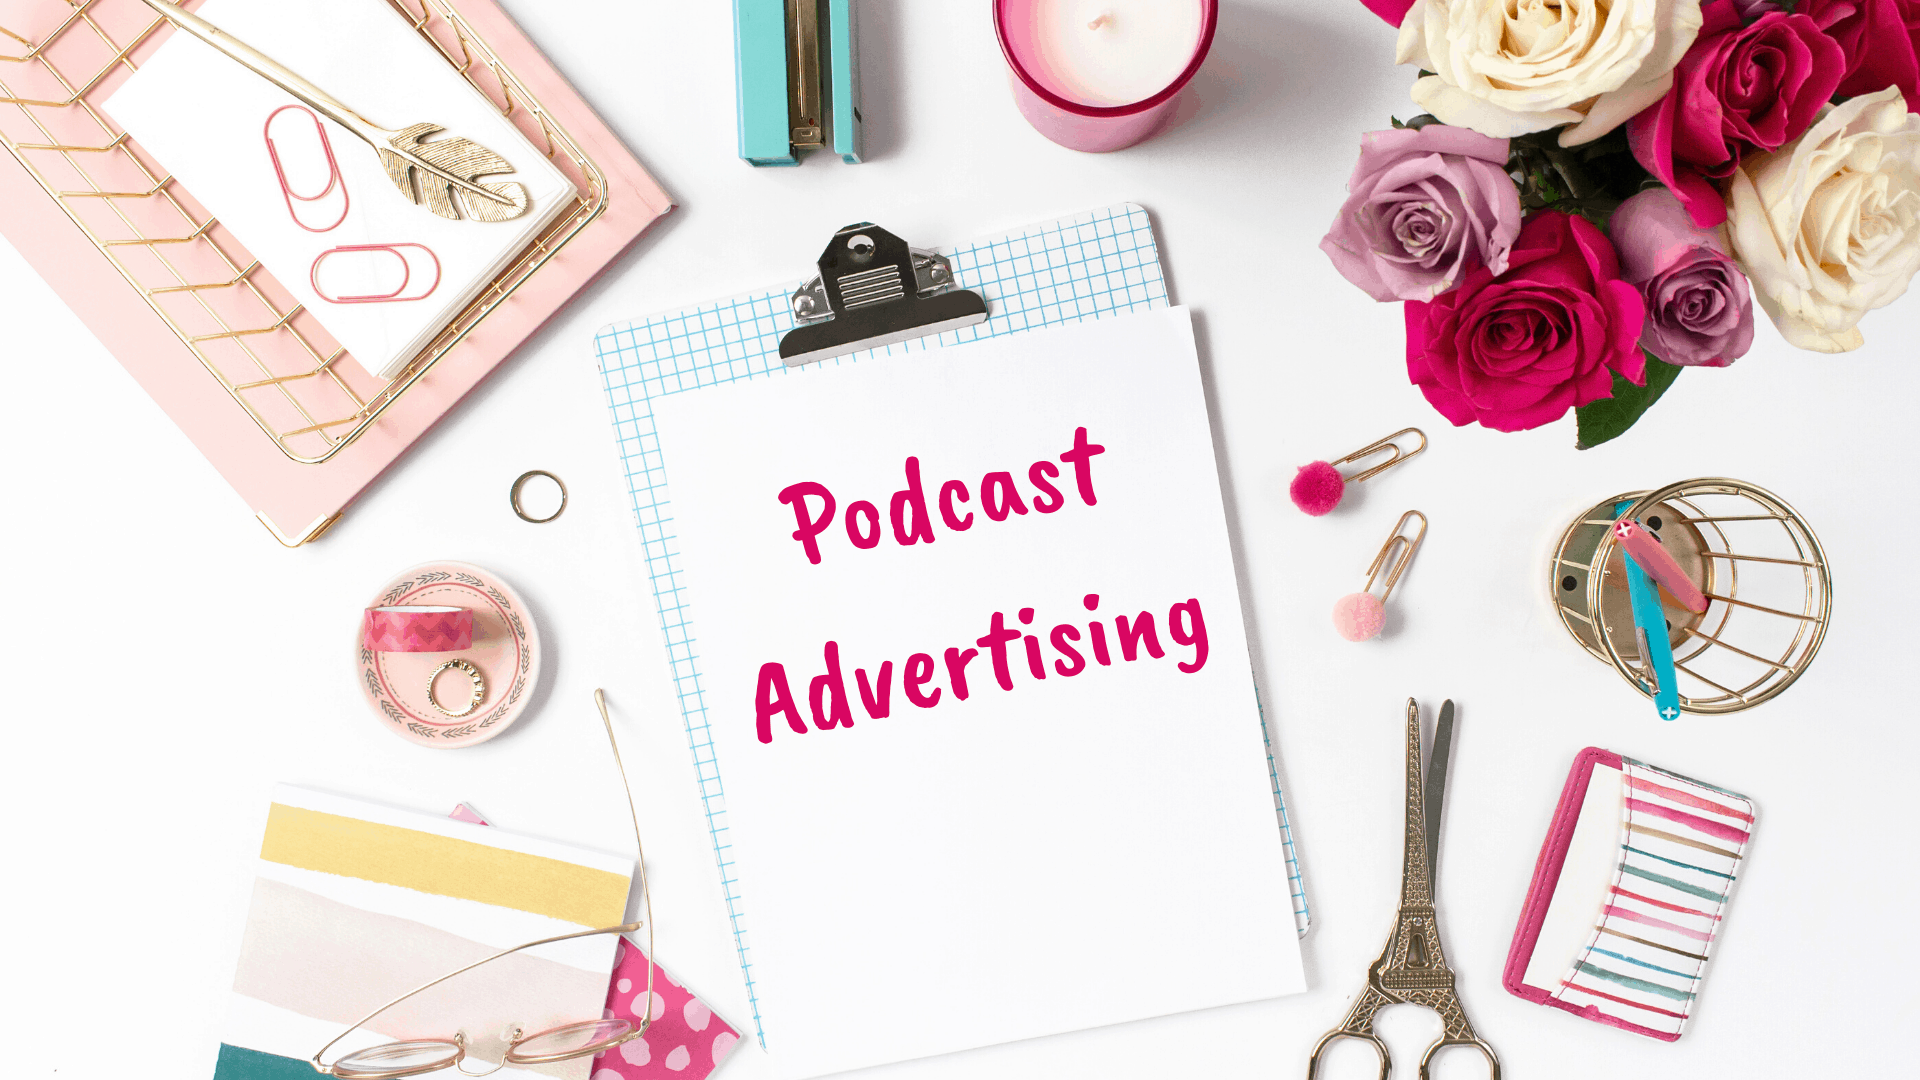 podcast advertising, pre-roll, mid-roll, CPM, promo codes, custom links, organic mentions, brand awareness